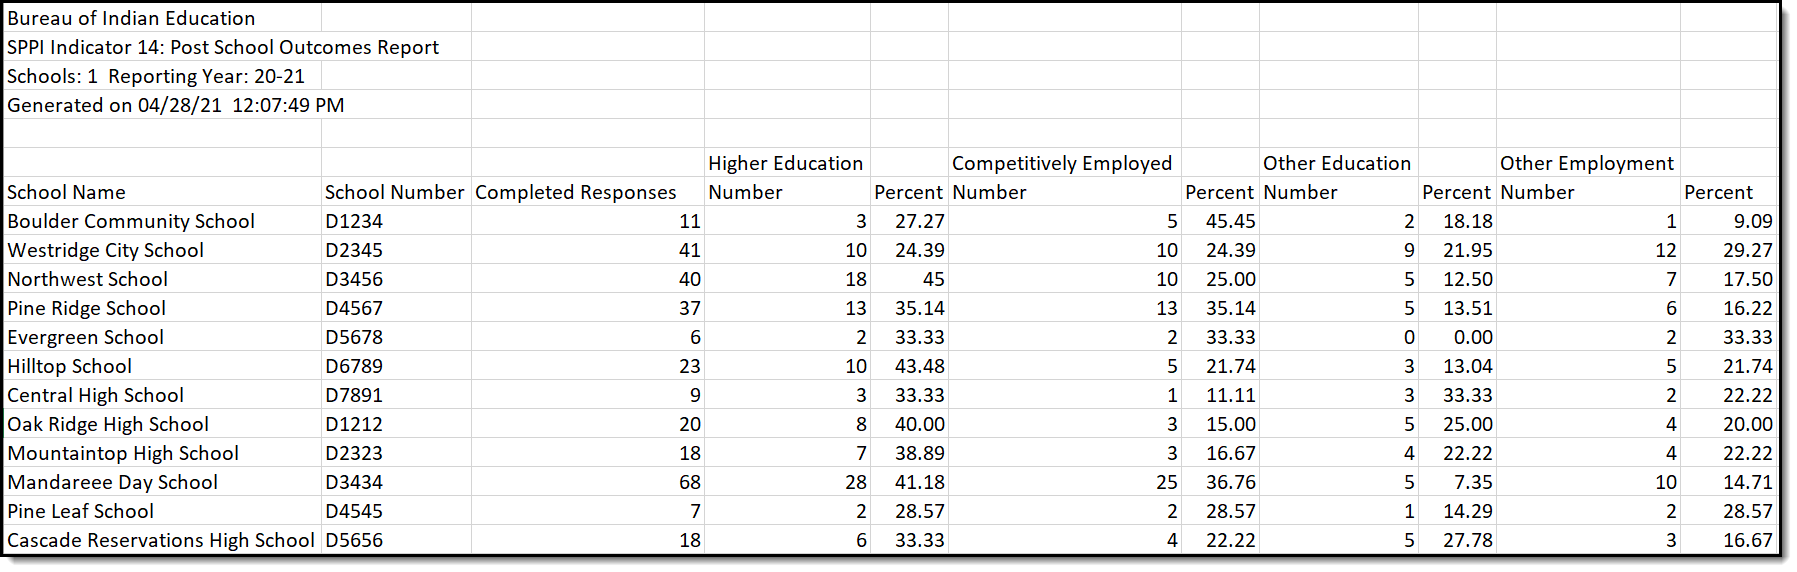 Screenshot of an example Post School Outcomes Report.